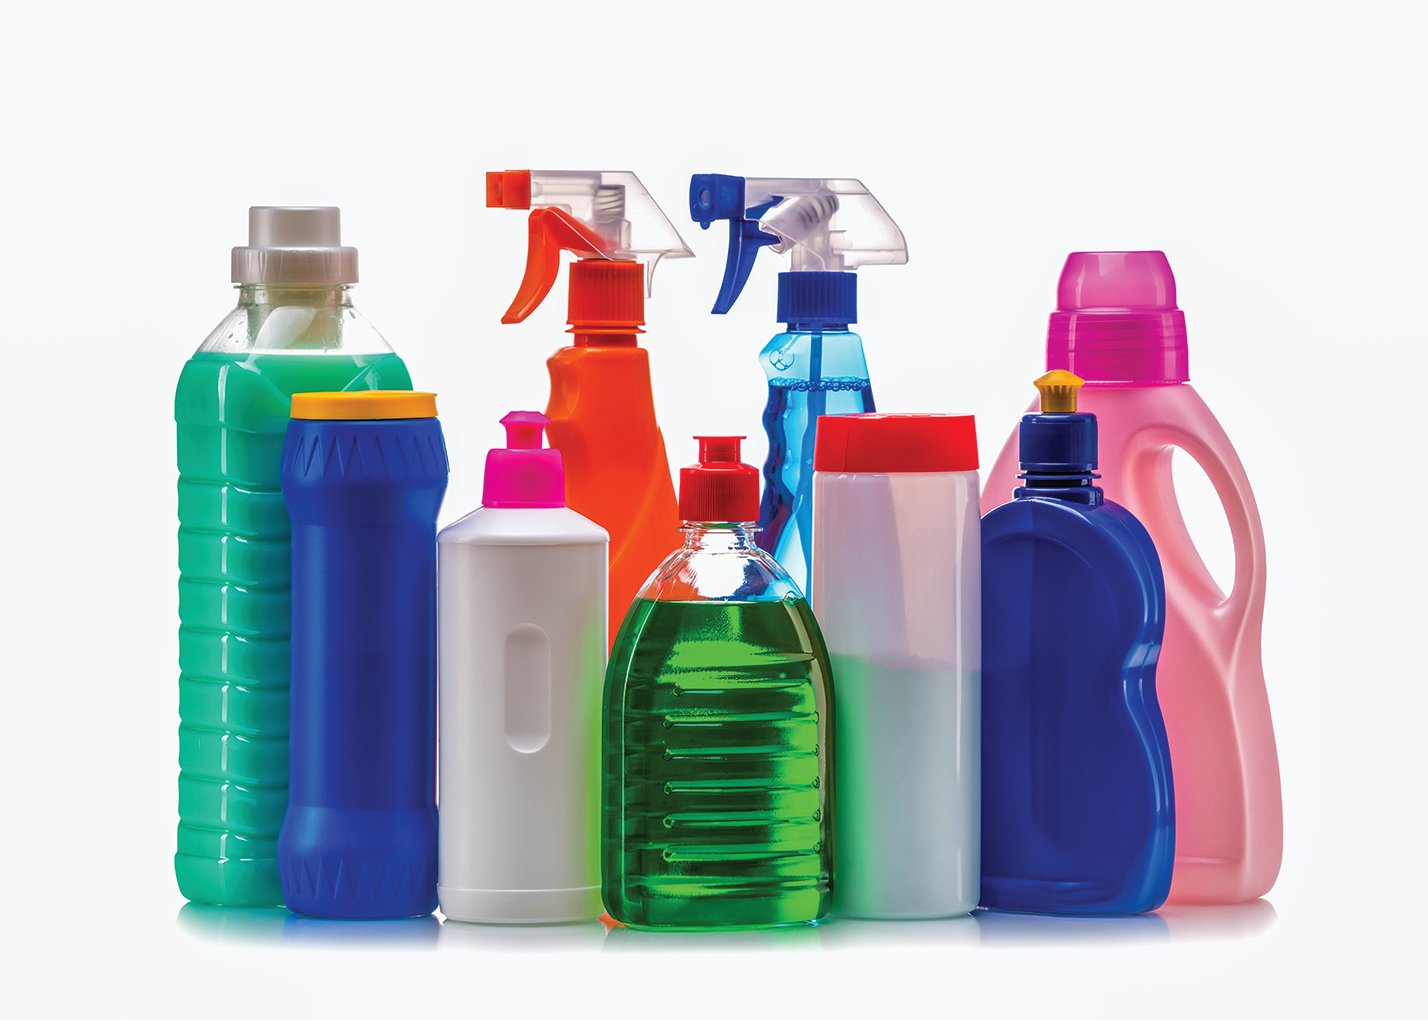 According to the Upstate New York Poison Center the top five poisonings for children ages 5 and younger were household cleaning products, personal care products, like hand sanitizers; analgesics, foreign objects, like toys and silica gel; and dietary supplements.